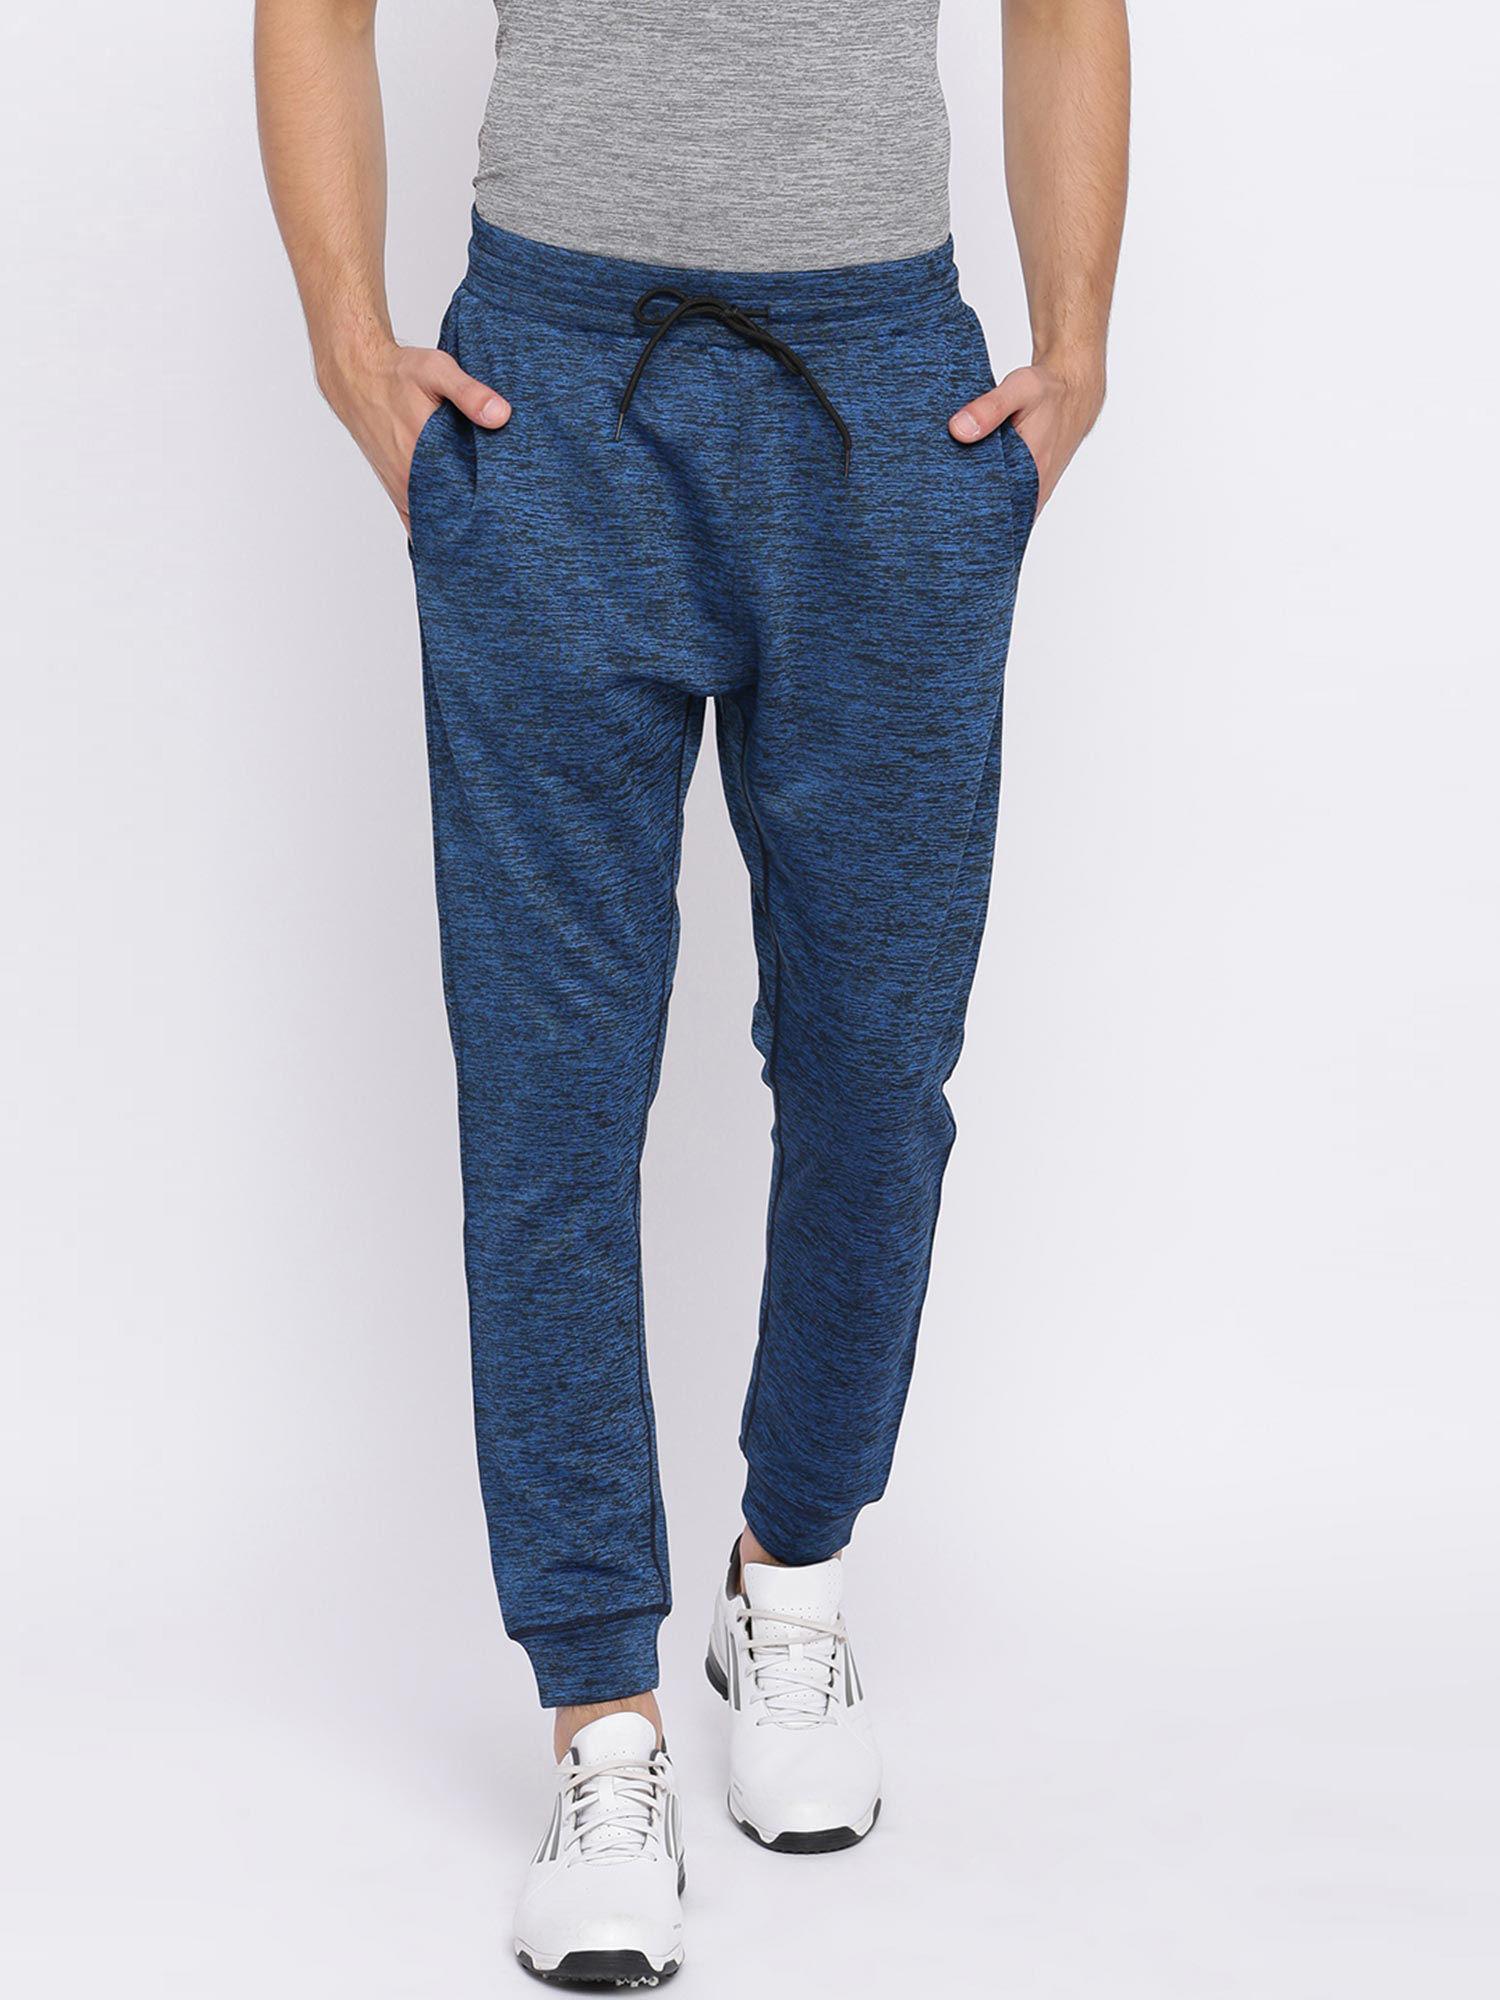 jogger fit snorkel blue knitted track pant